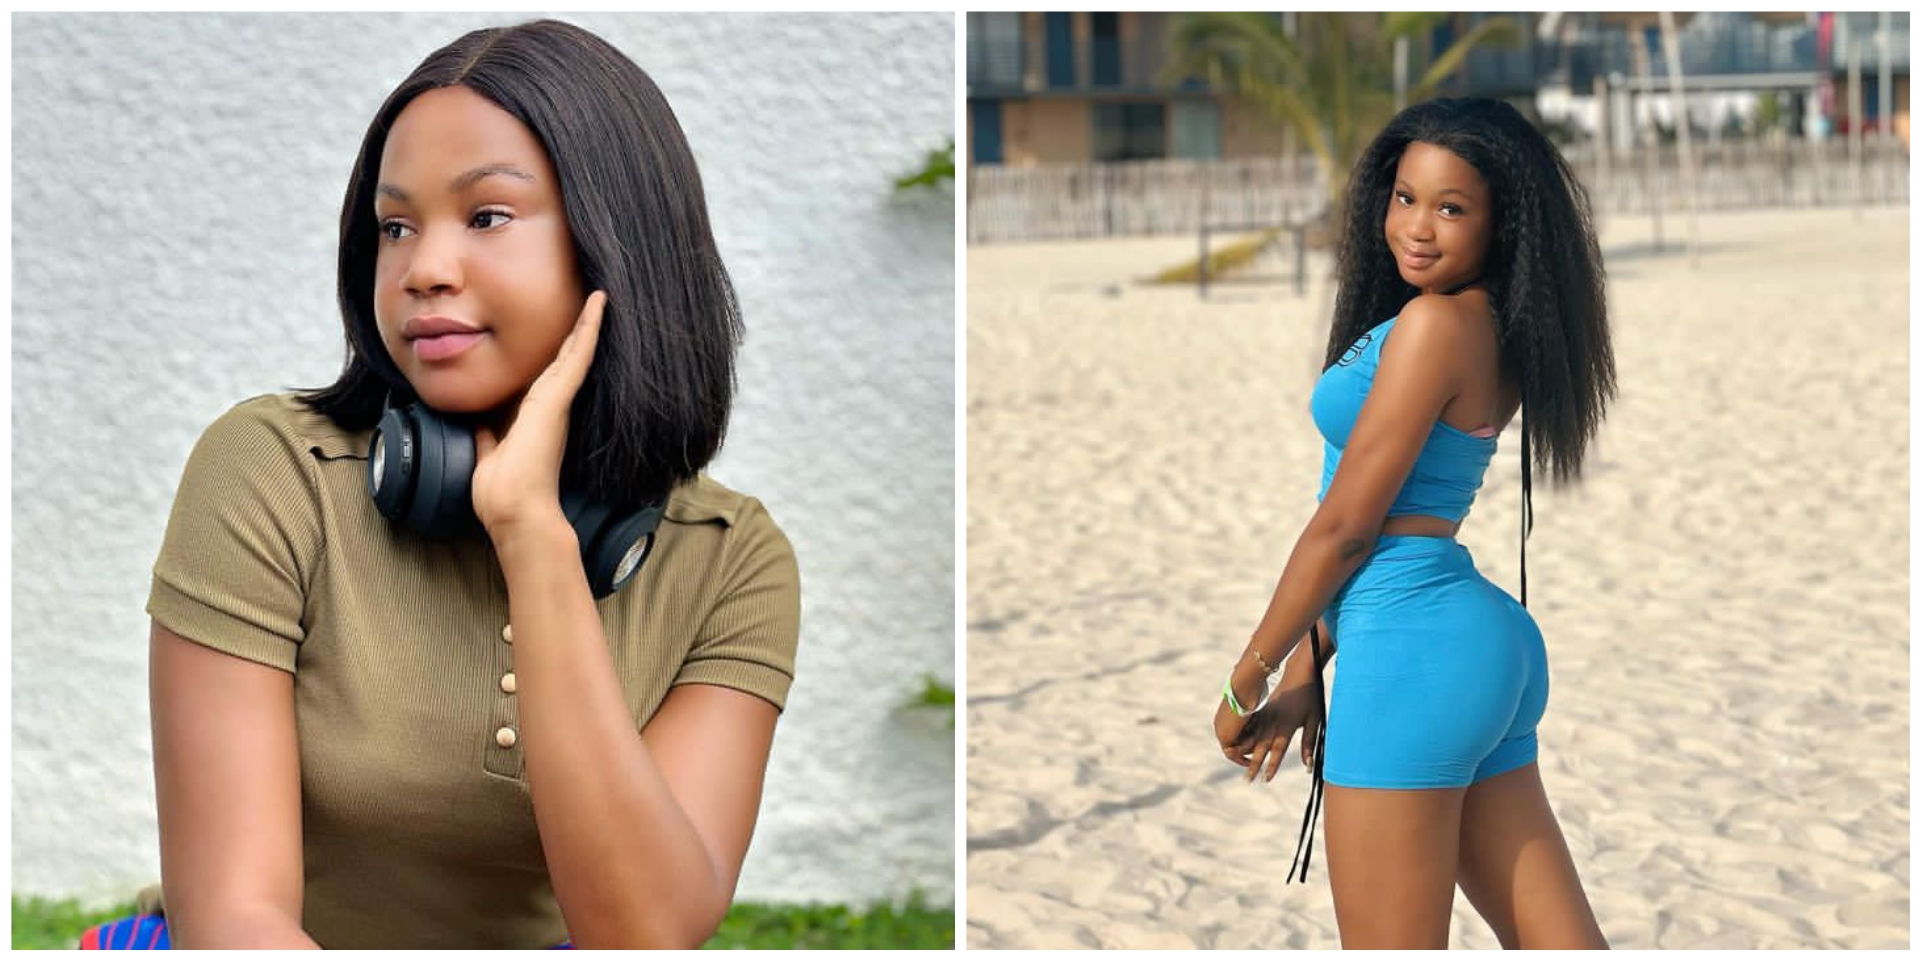 “You don collect before?” – Netizen quizzes young actress Mercy Kenneth, she responds